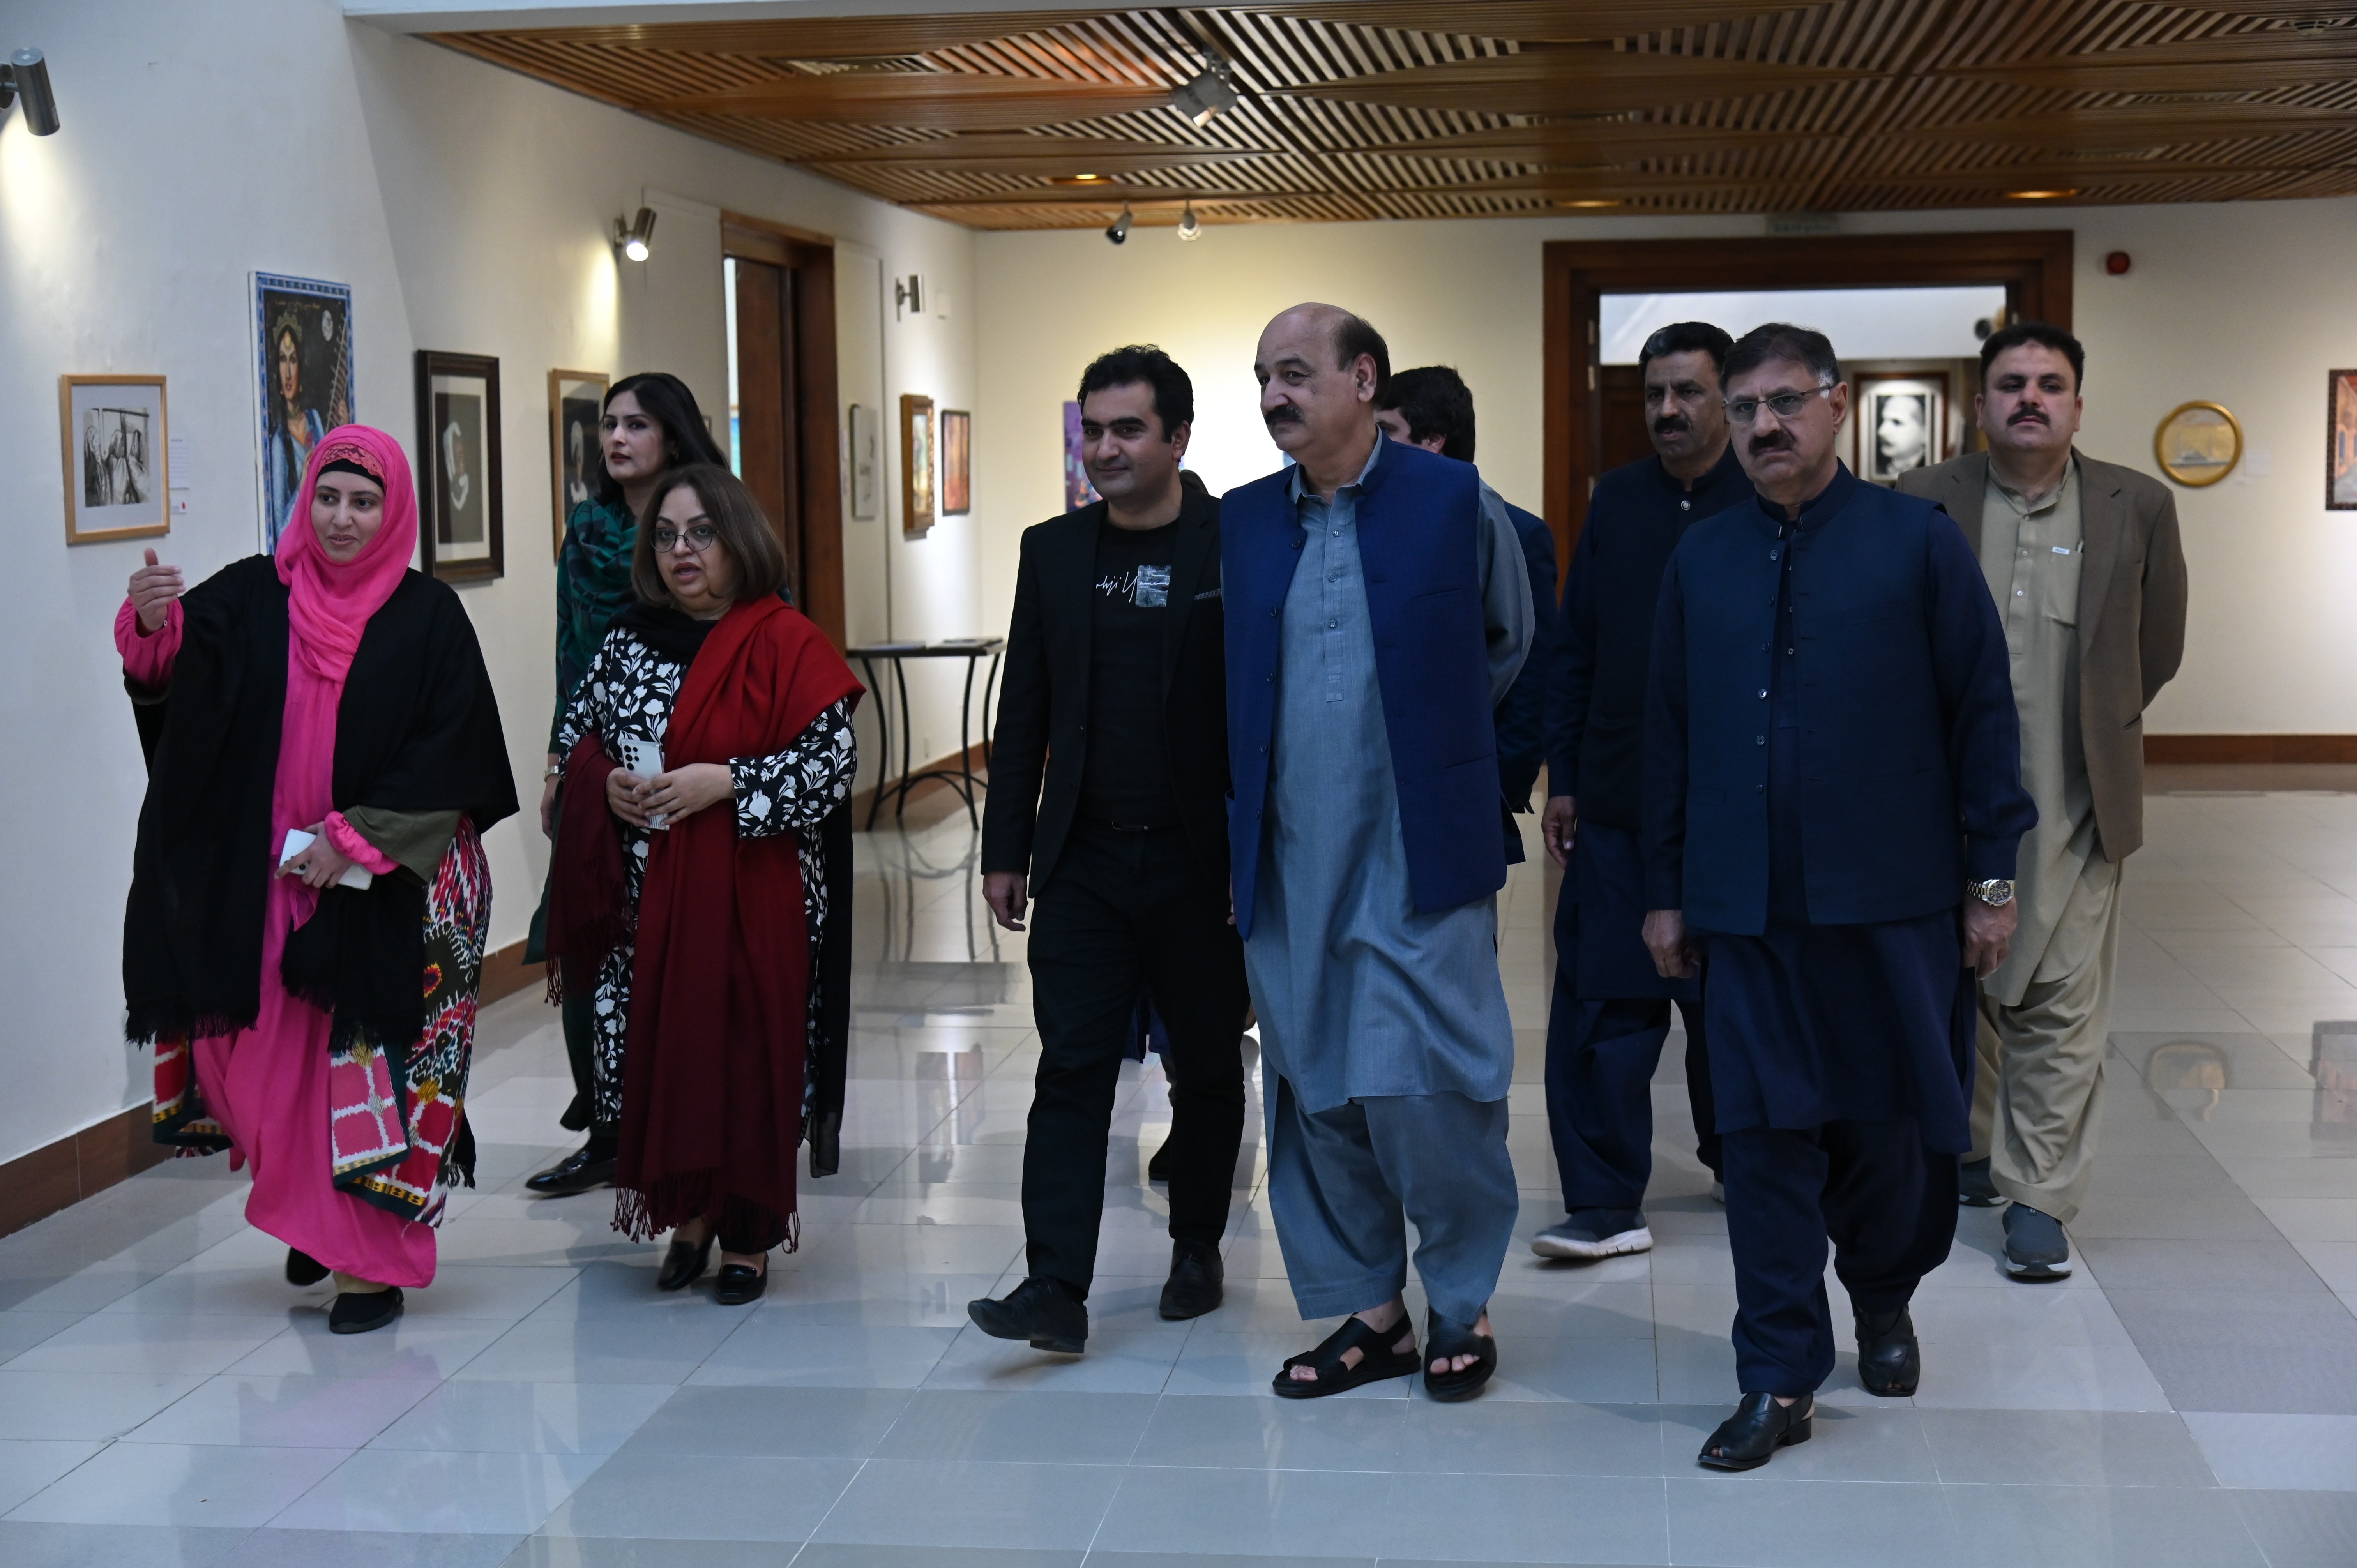 The visit of chief guests at the calligraphy exhibition hosted by PNCA